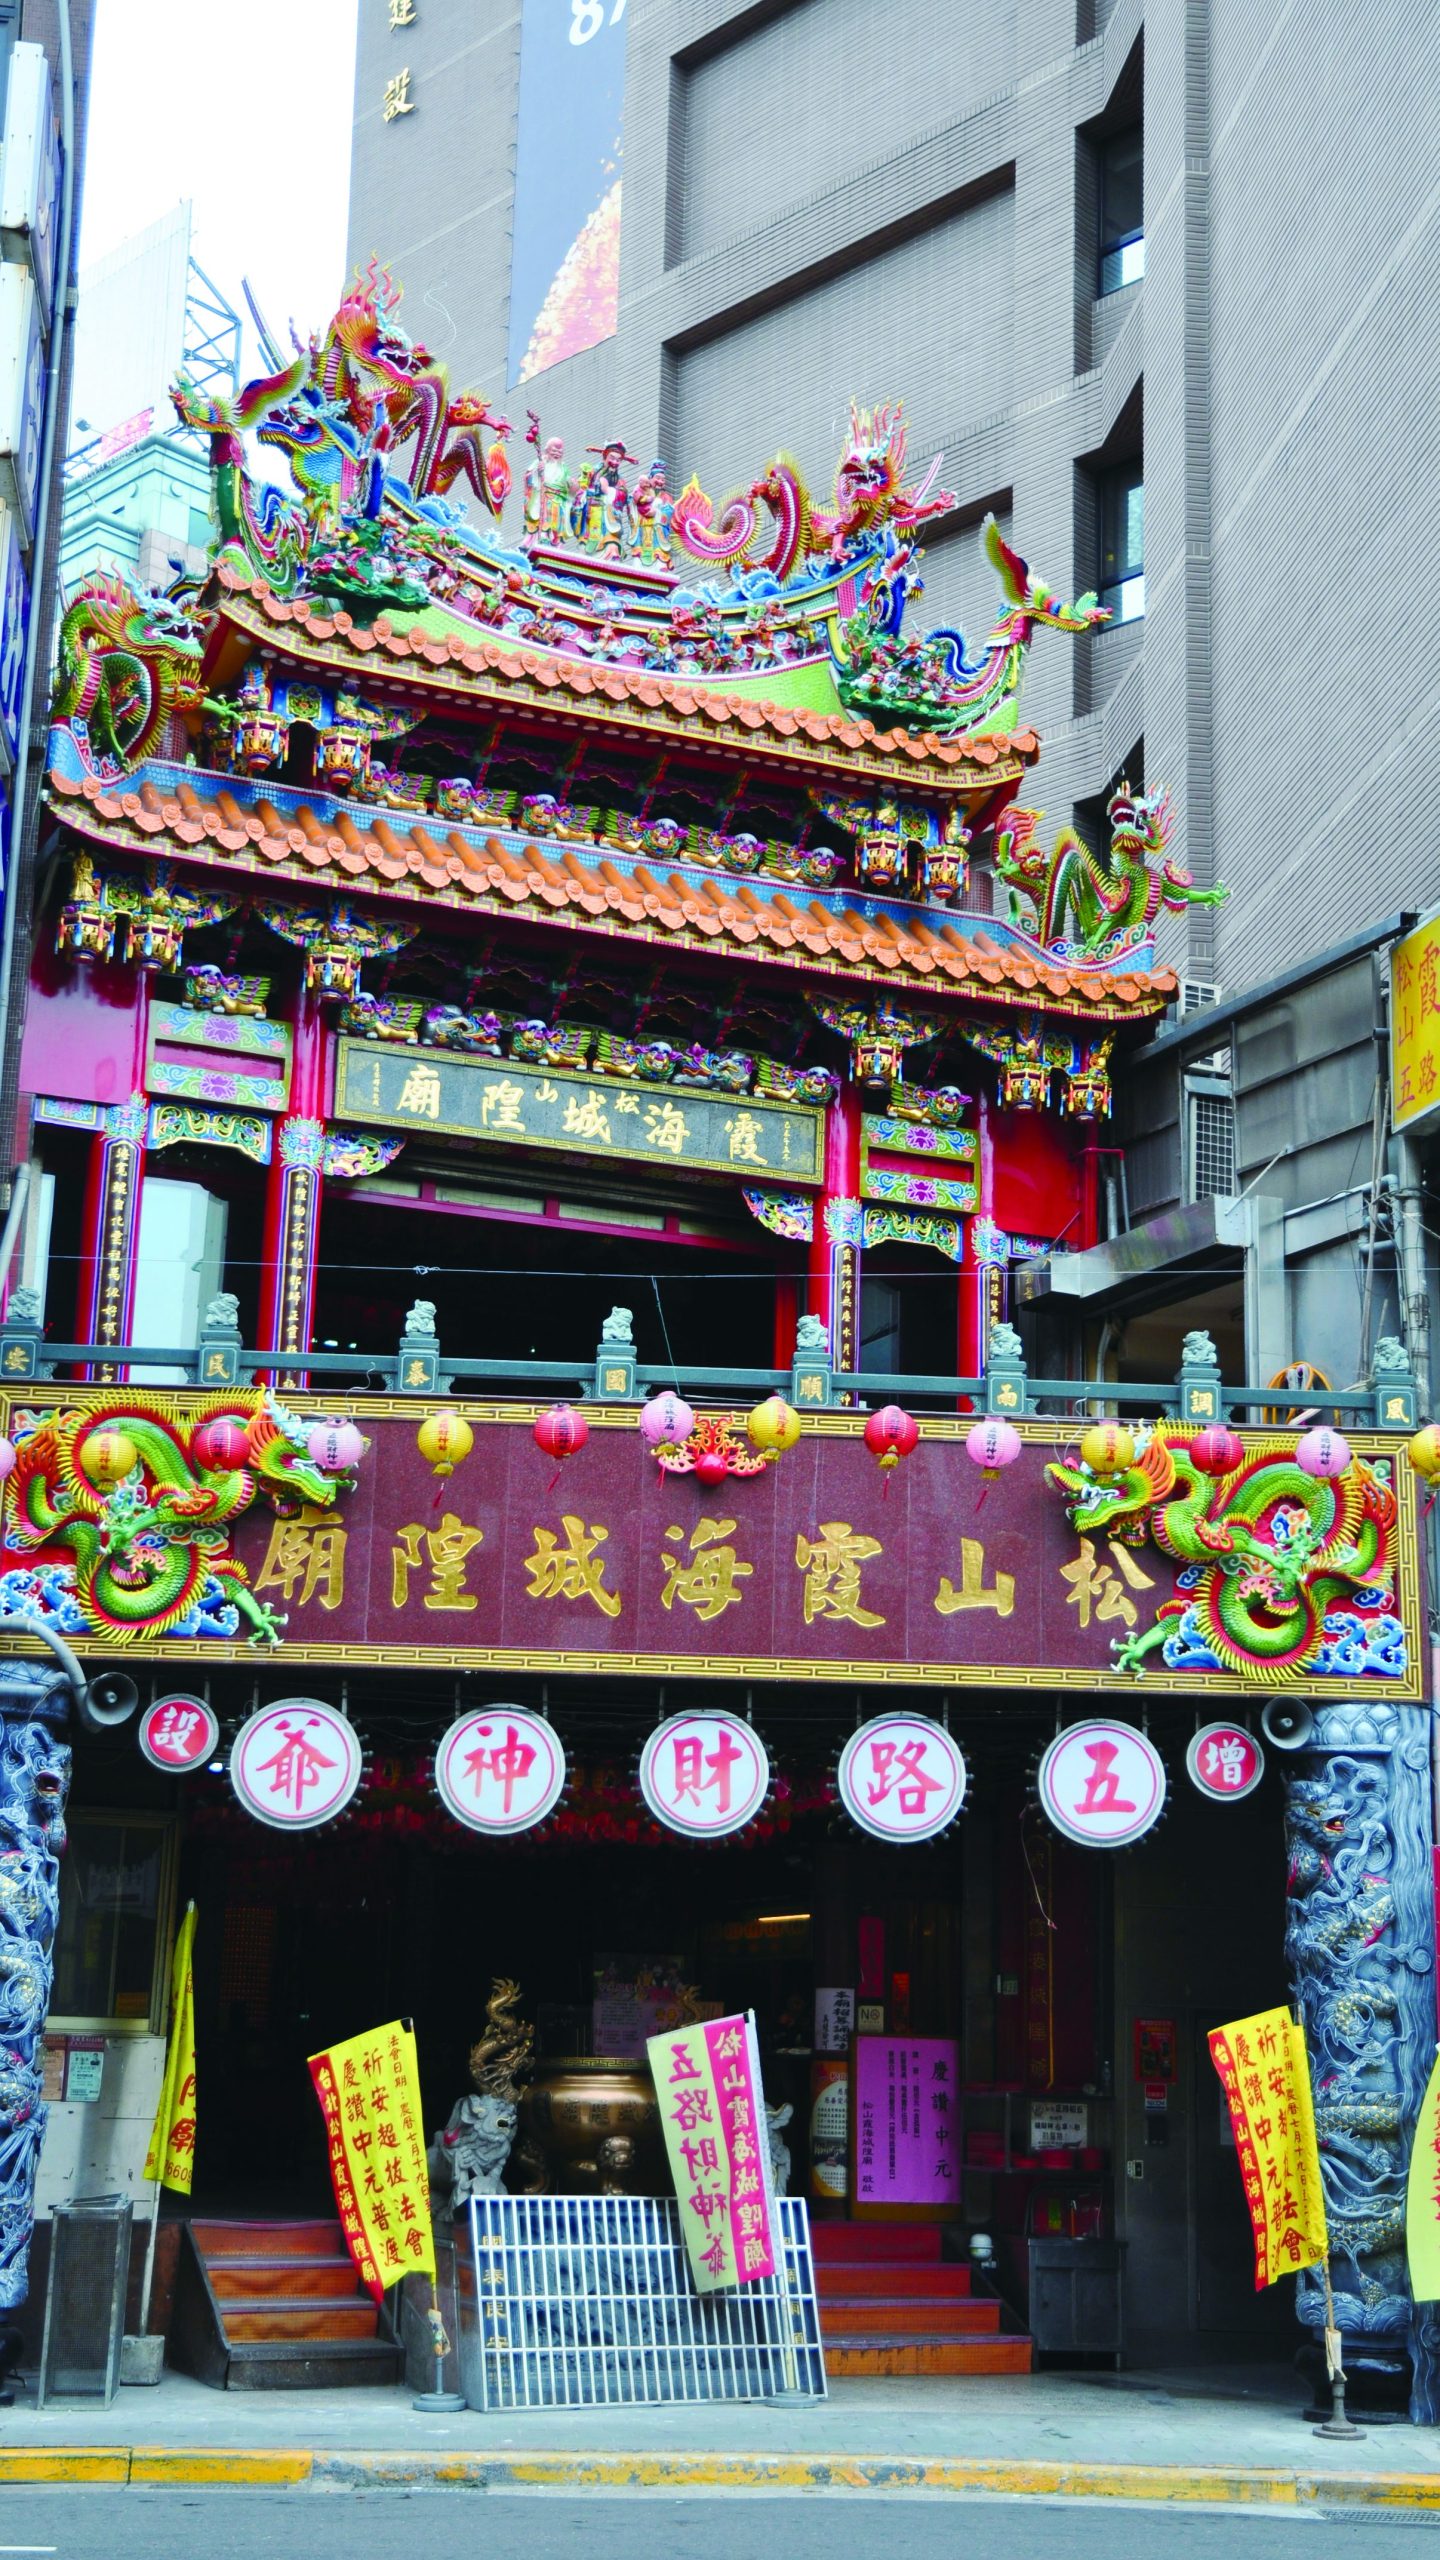 In the 1970s, as the government needed to widen the road, local gentry raised funds to relocate the Songshan Xiahai City God Temple to its current location. (Photo・Songshan Xiahai City God Temple)